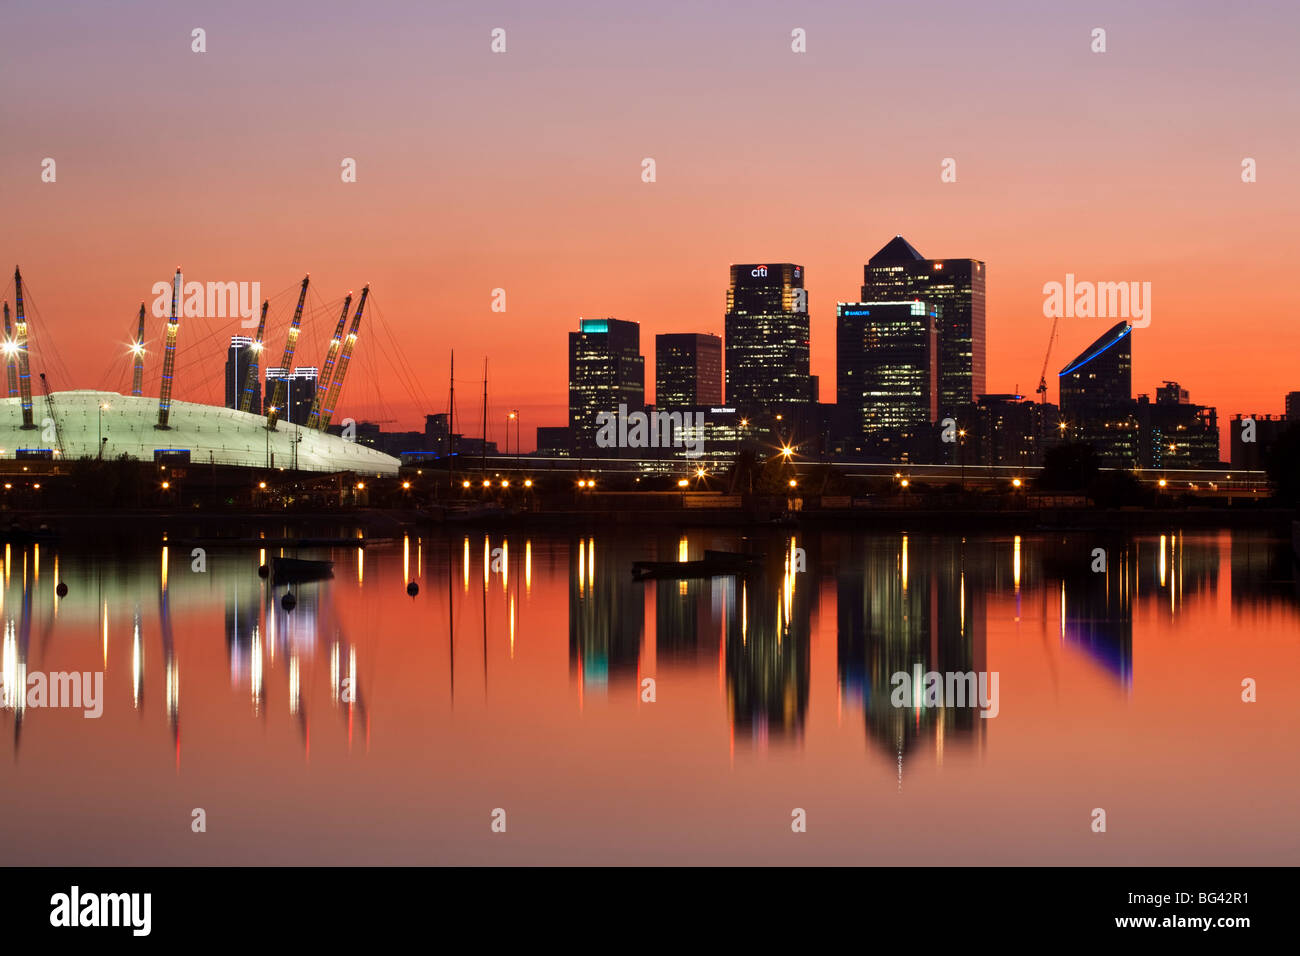 England, London, Newham,O2 Arena and Canary Wharf buildings reflecting in  Royal Victoria Docks Stock Photo